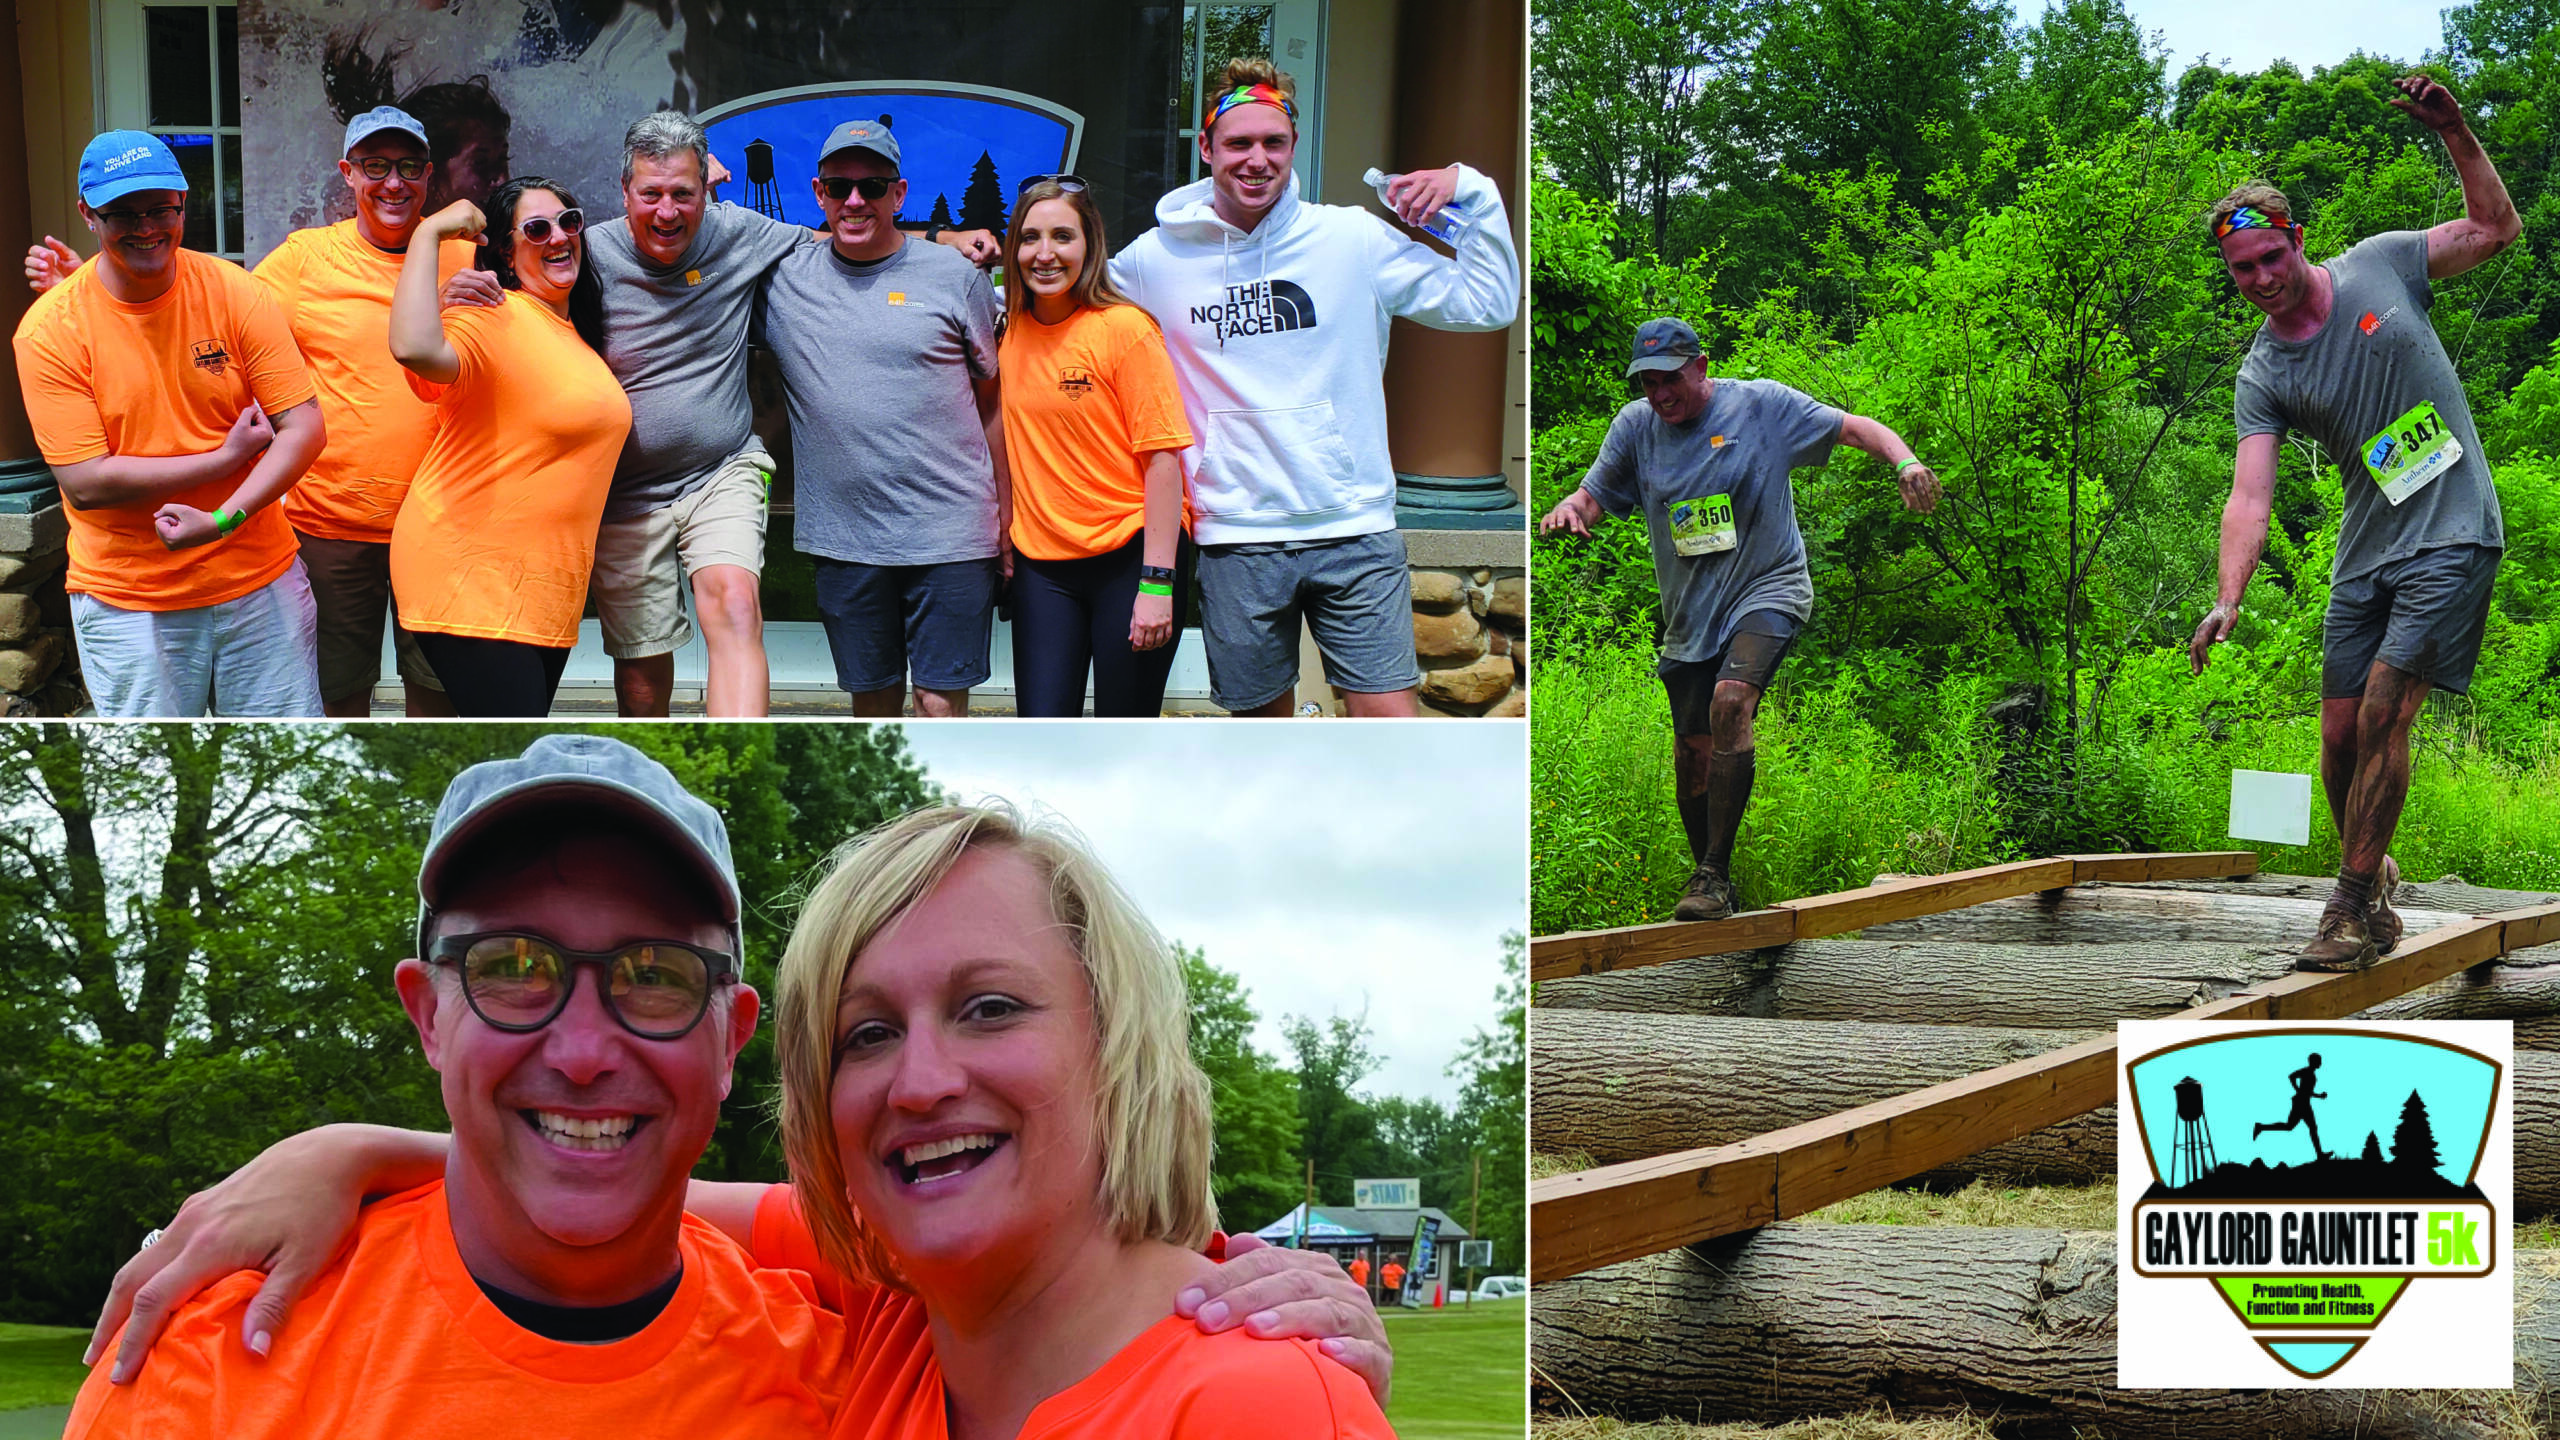 E4Hcares Rocks the Gaylord Gauntlet - E4H